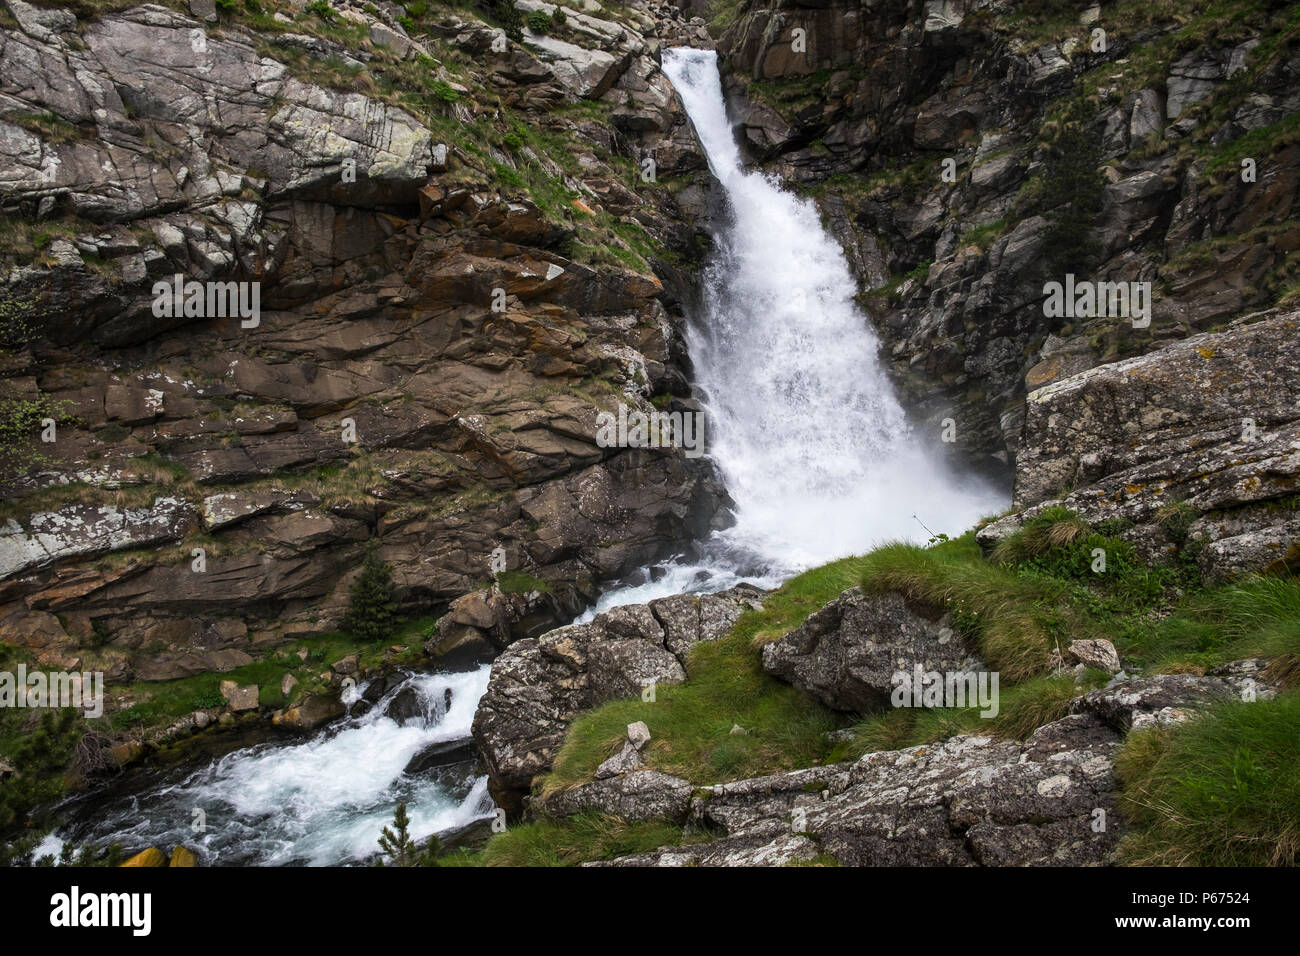 La Cua de Cavalt, Horses Tail, waterfall on the Rio de Nuria river in the Vall de Nuria flowing strongly full of water in the Pyreneean mountains, Cat Stock Photo